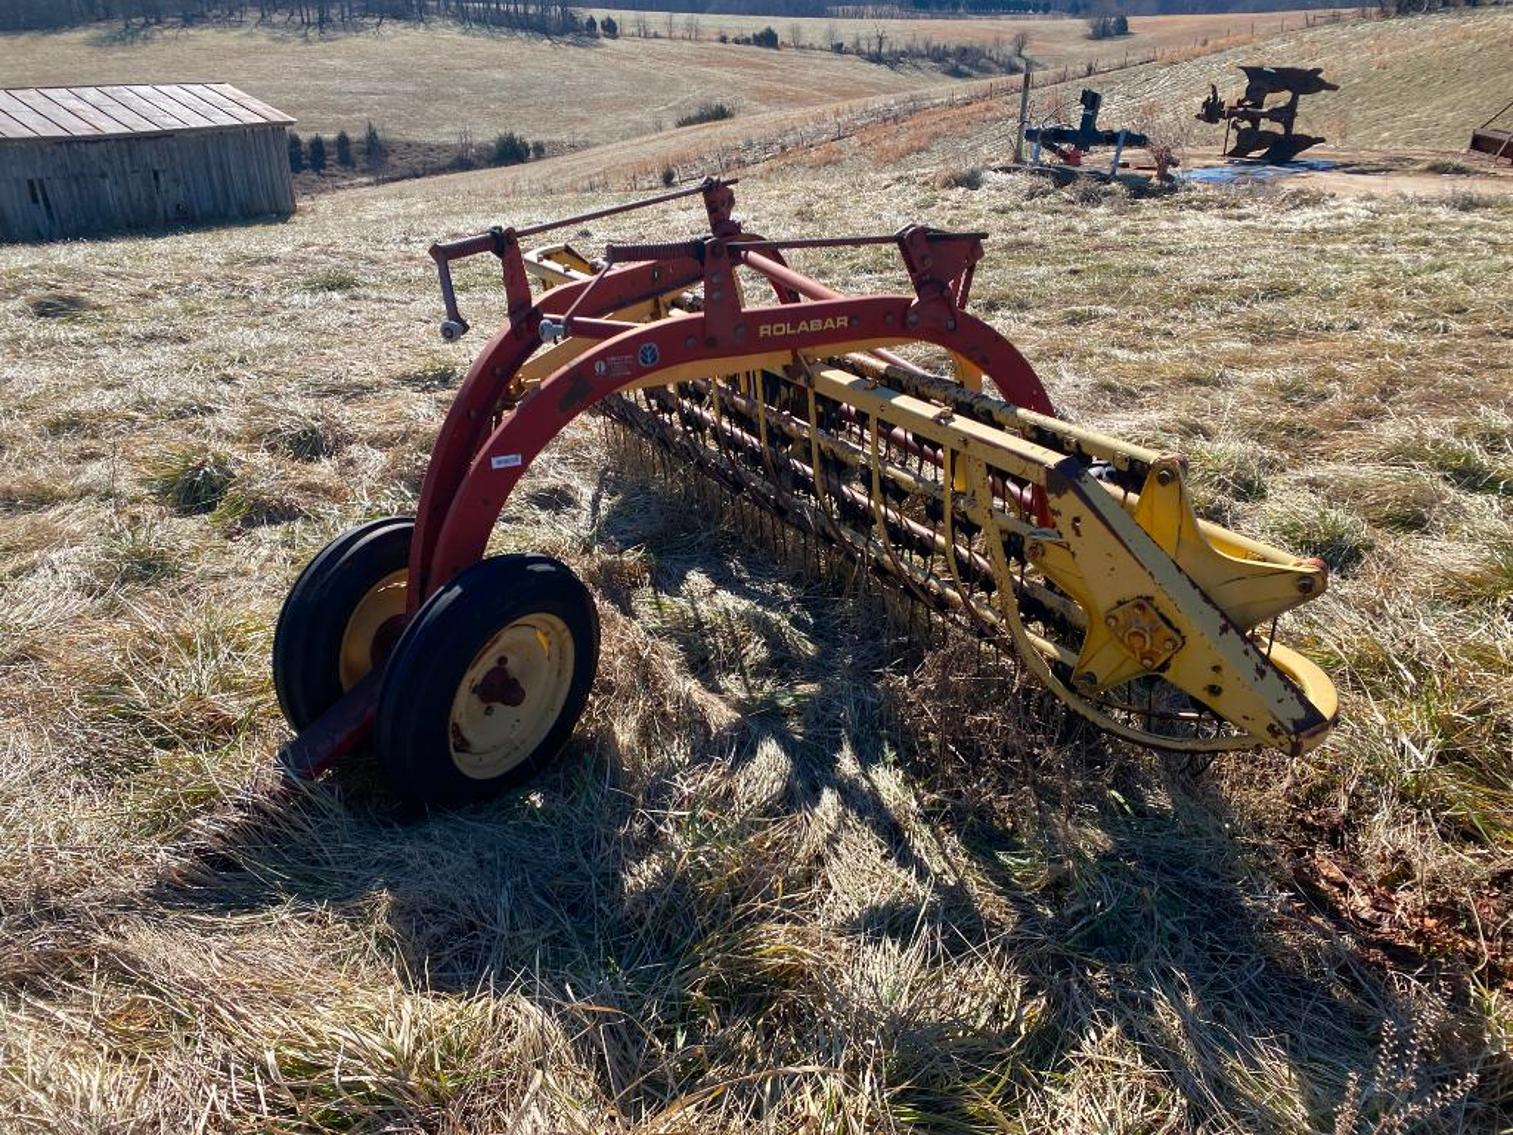 Image for New Holland Rolabar Hay Rake Model 260 w/Dolley Wheel Pull Type